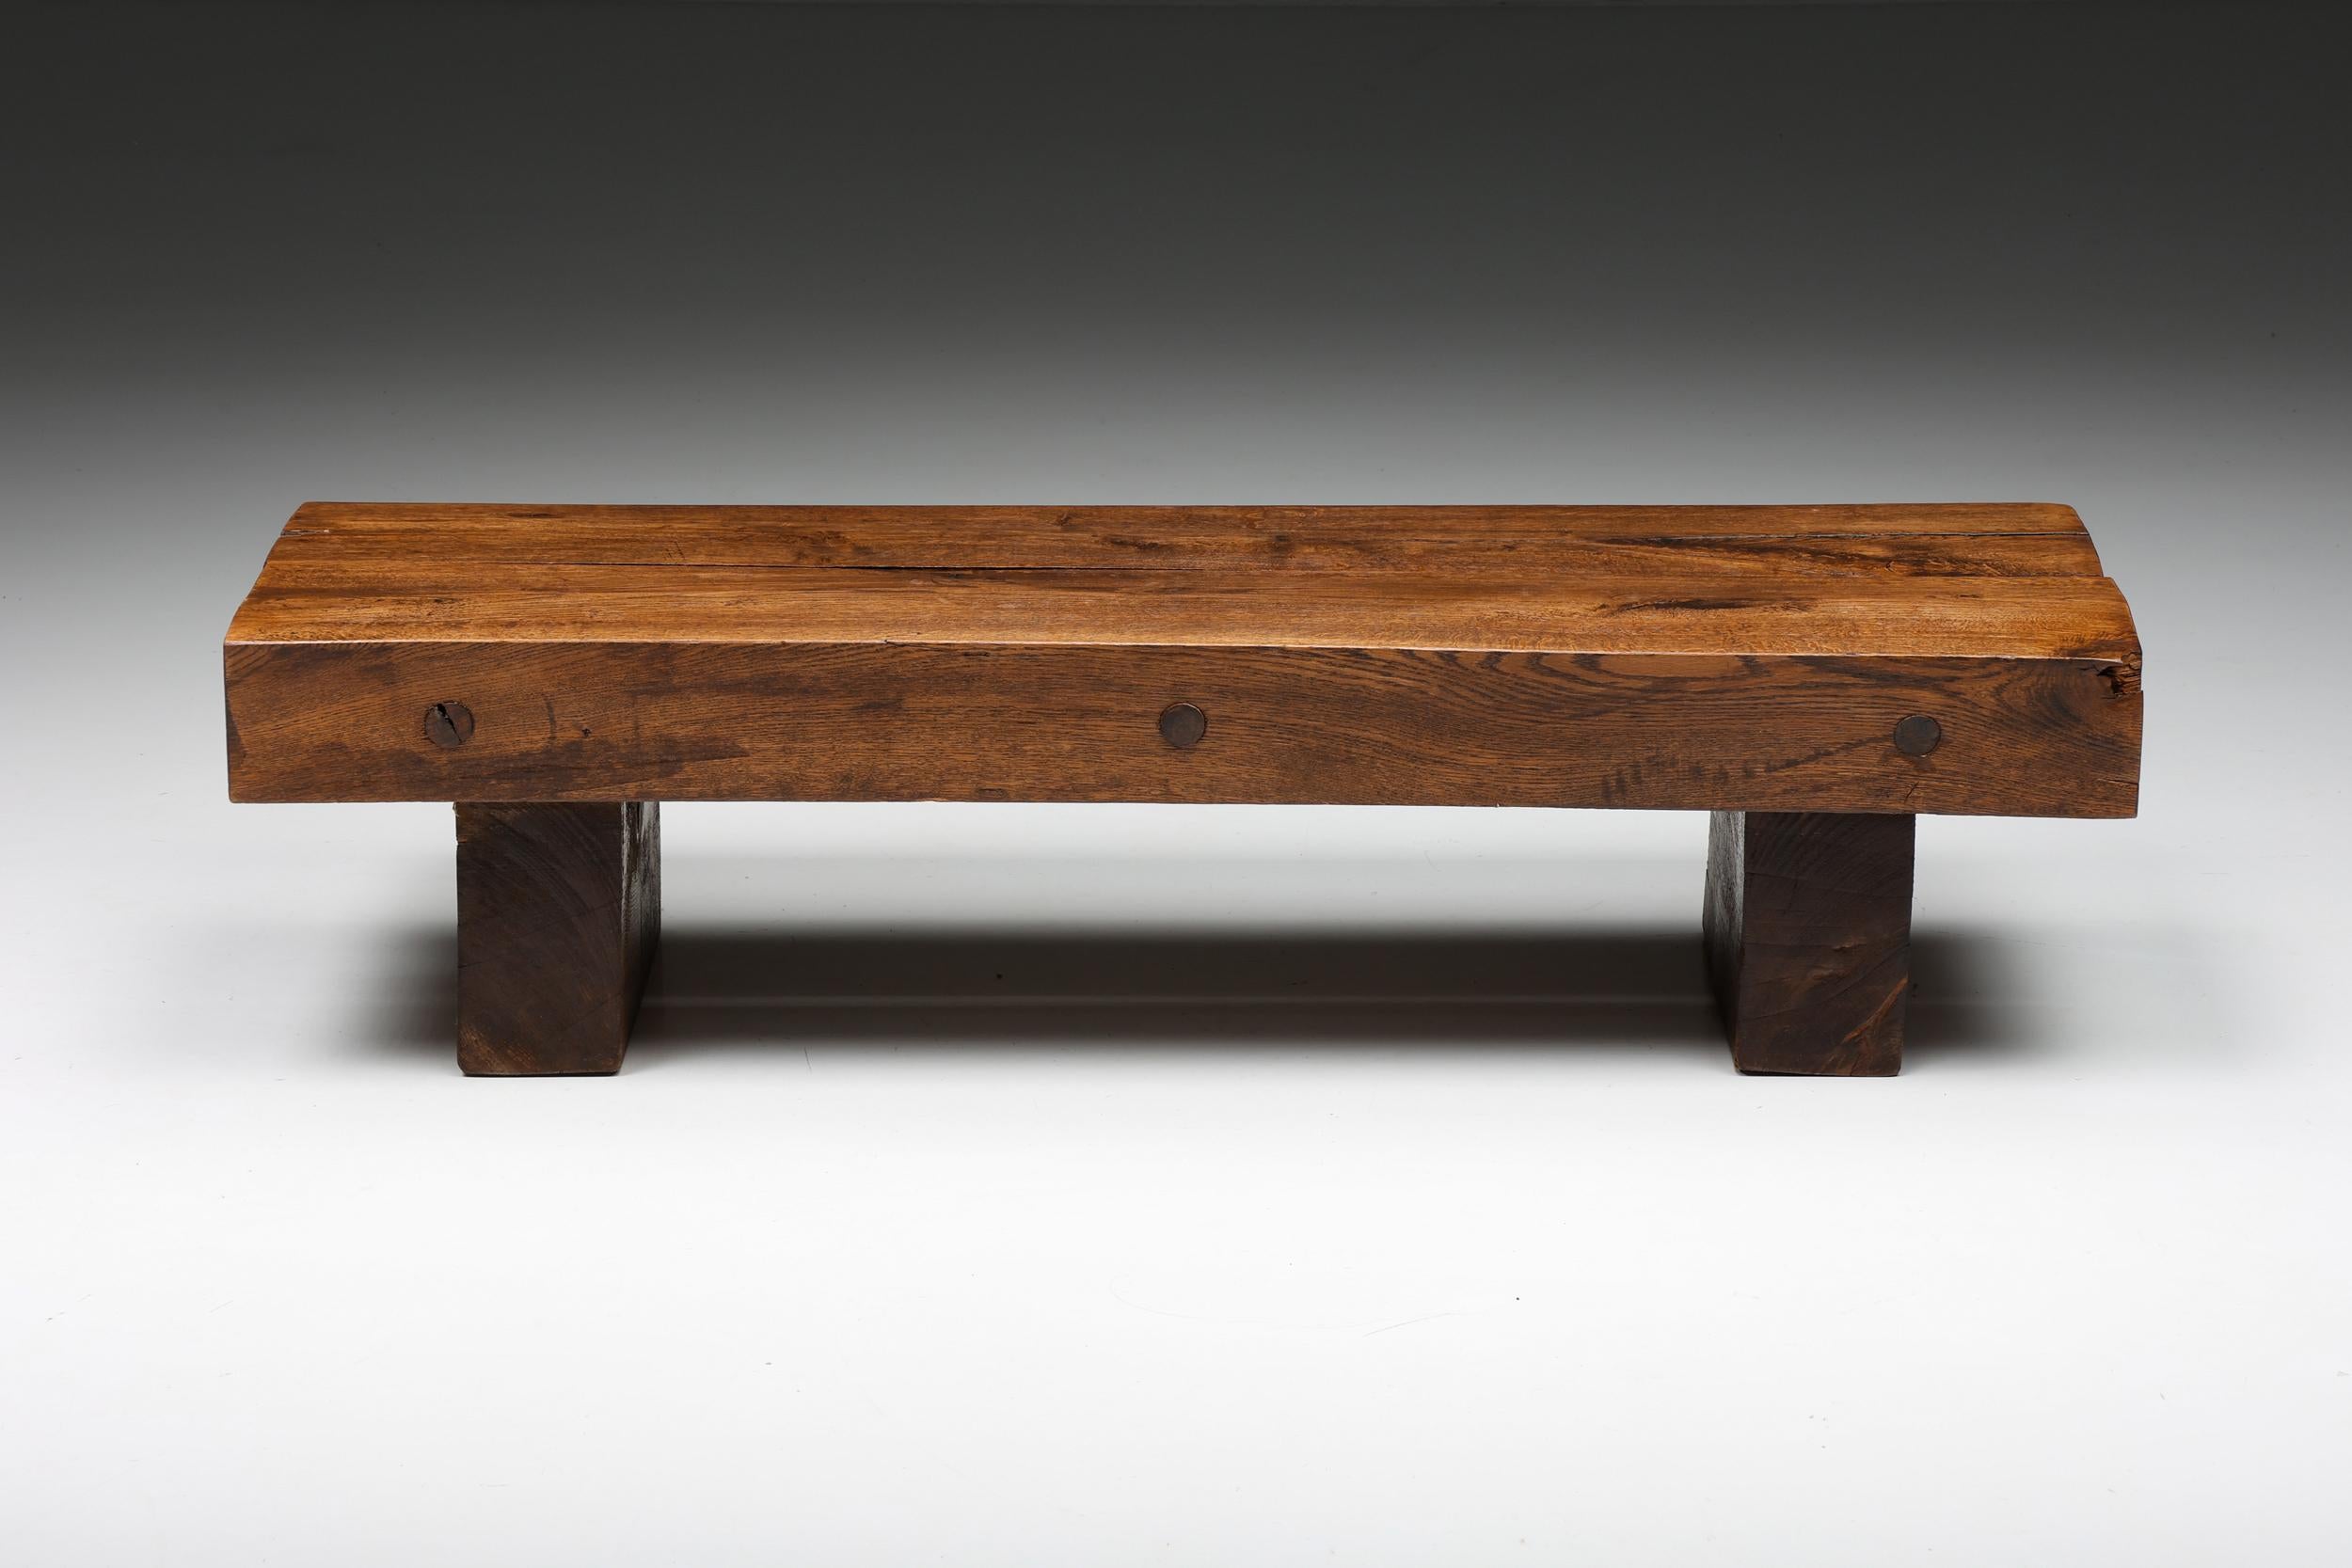 Wabi-Sabi two-legged rectangular coffee table, Mid-Century Modern, 1940's 

Two-legged rectangular coffee table. The tabletop consists of two pieces of solid wood, on the sides you can see the round joinery system that keeps the wood in place.